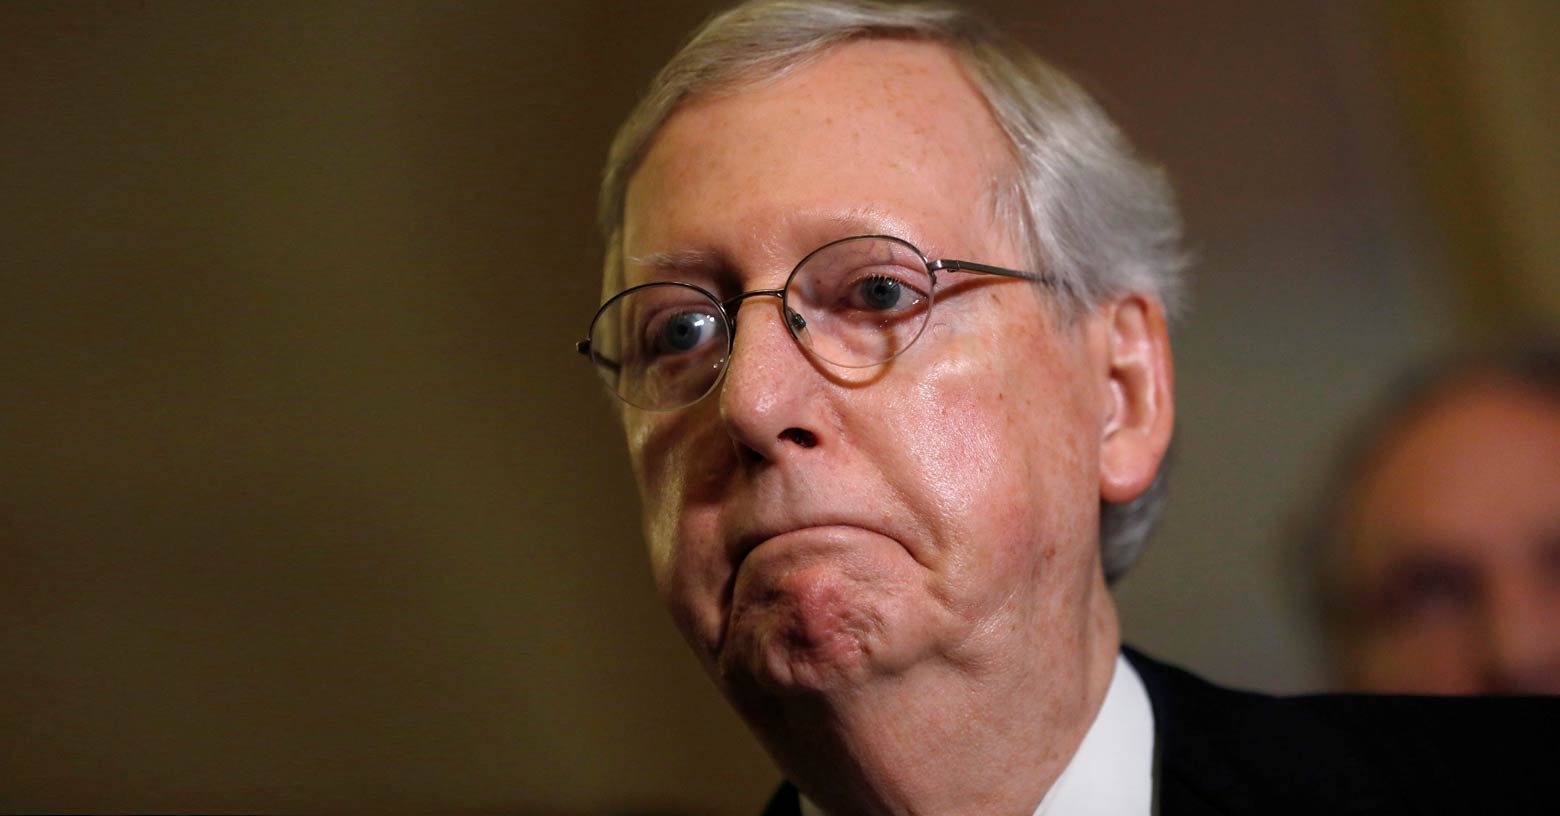 McConnell's health plan has five fatal flaws